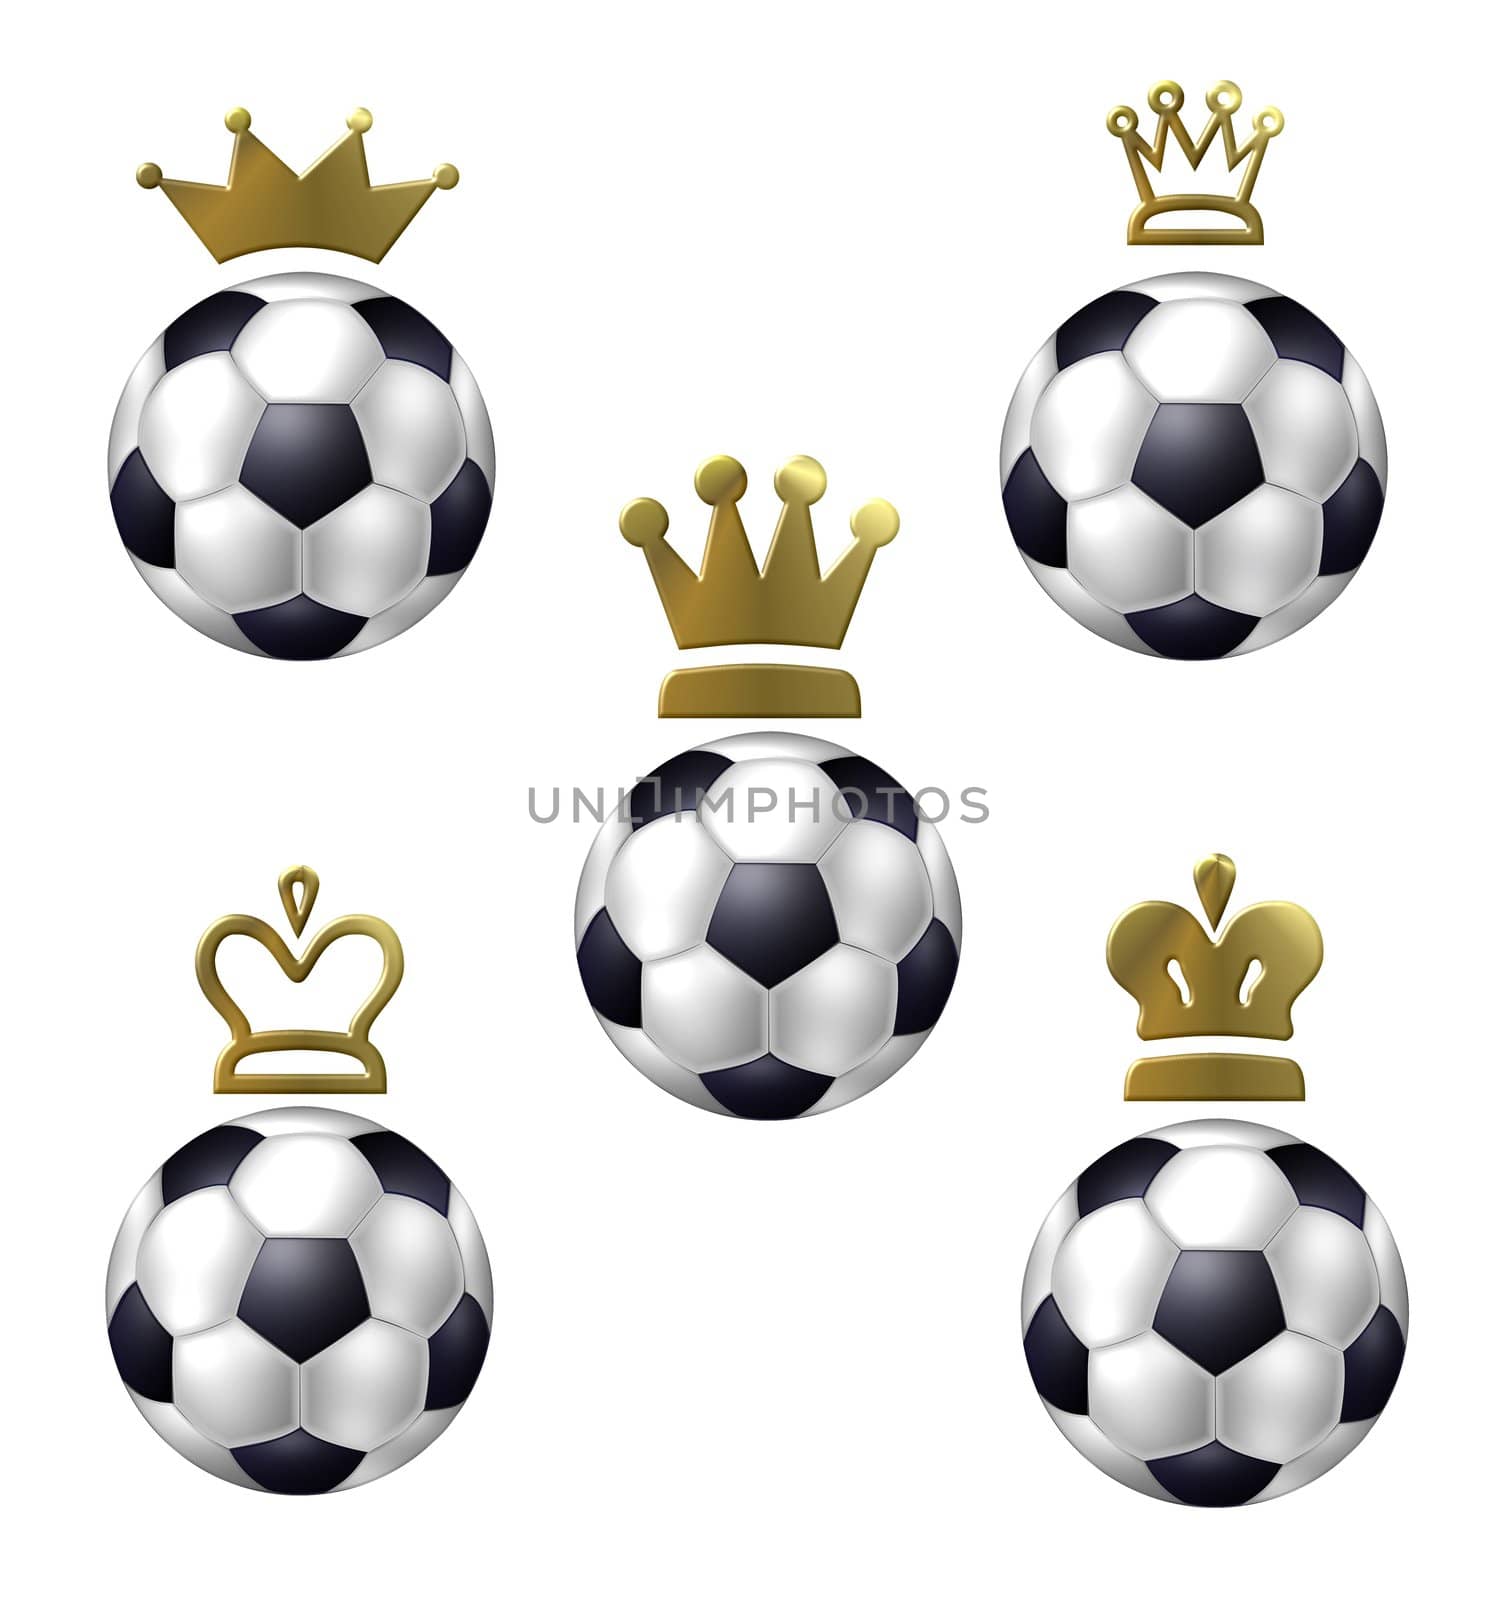 soccer crowns by peromarketing